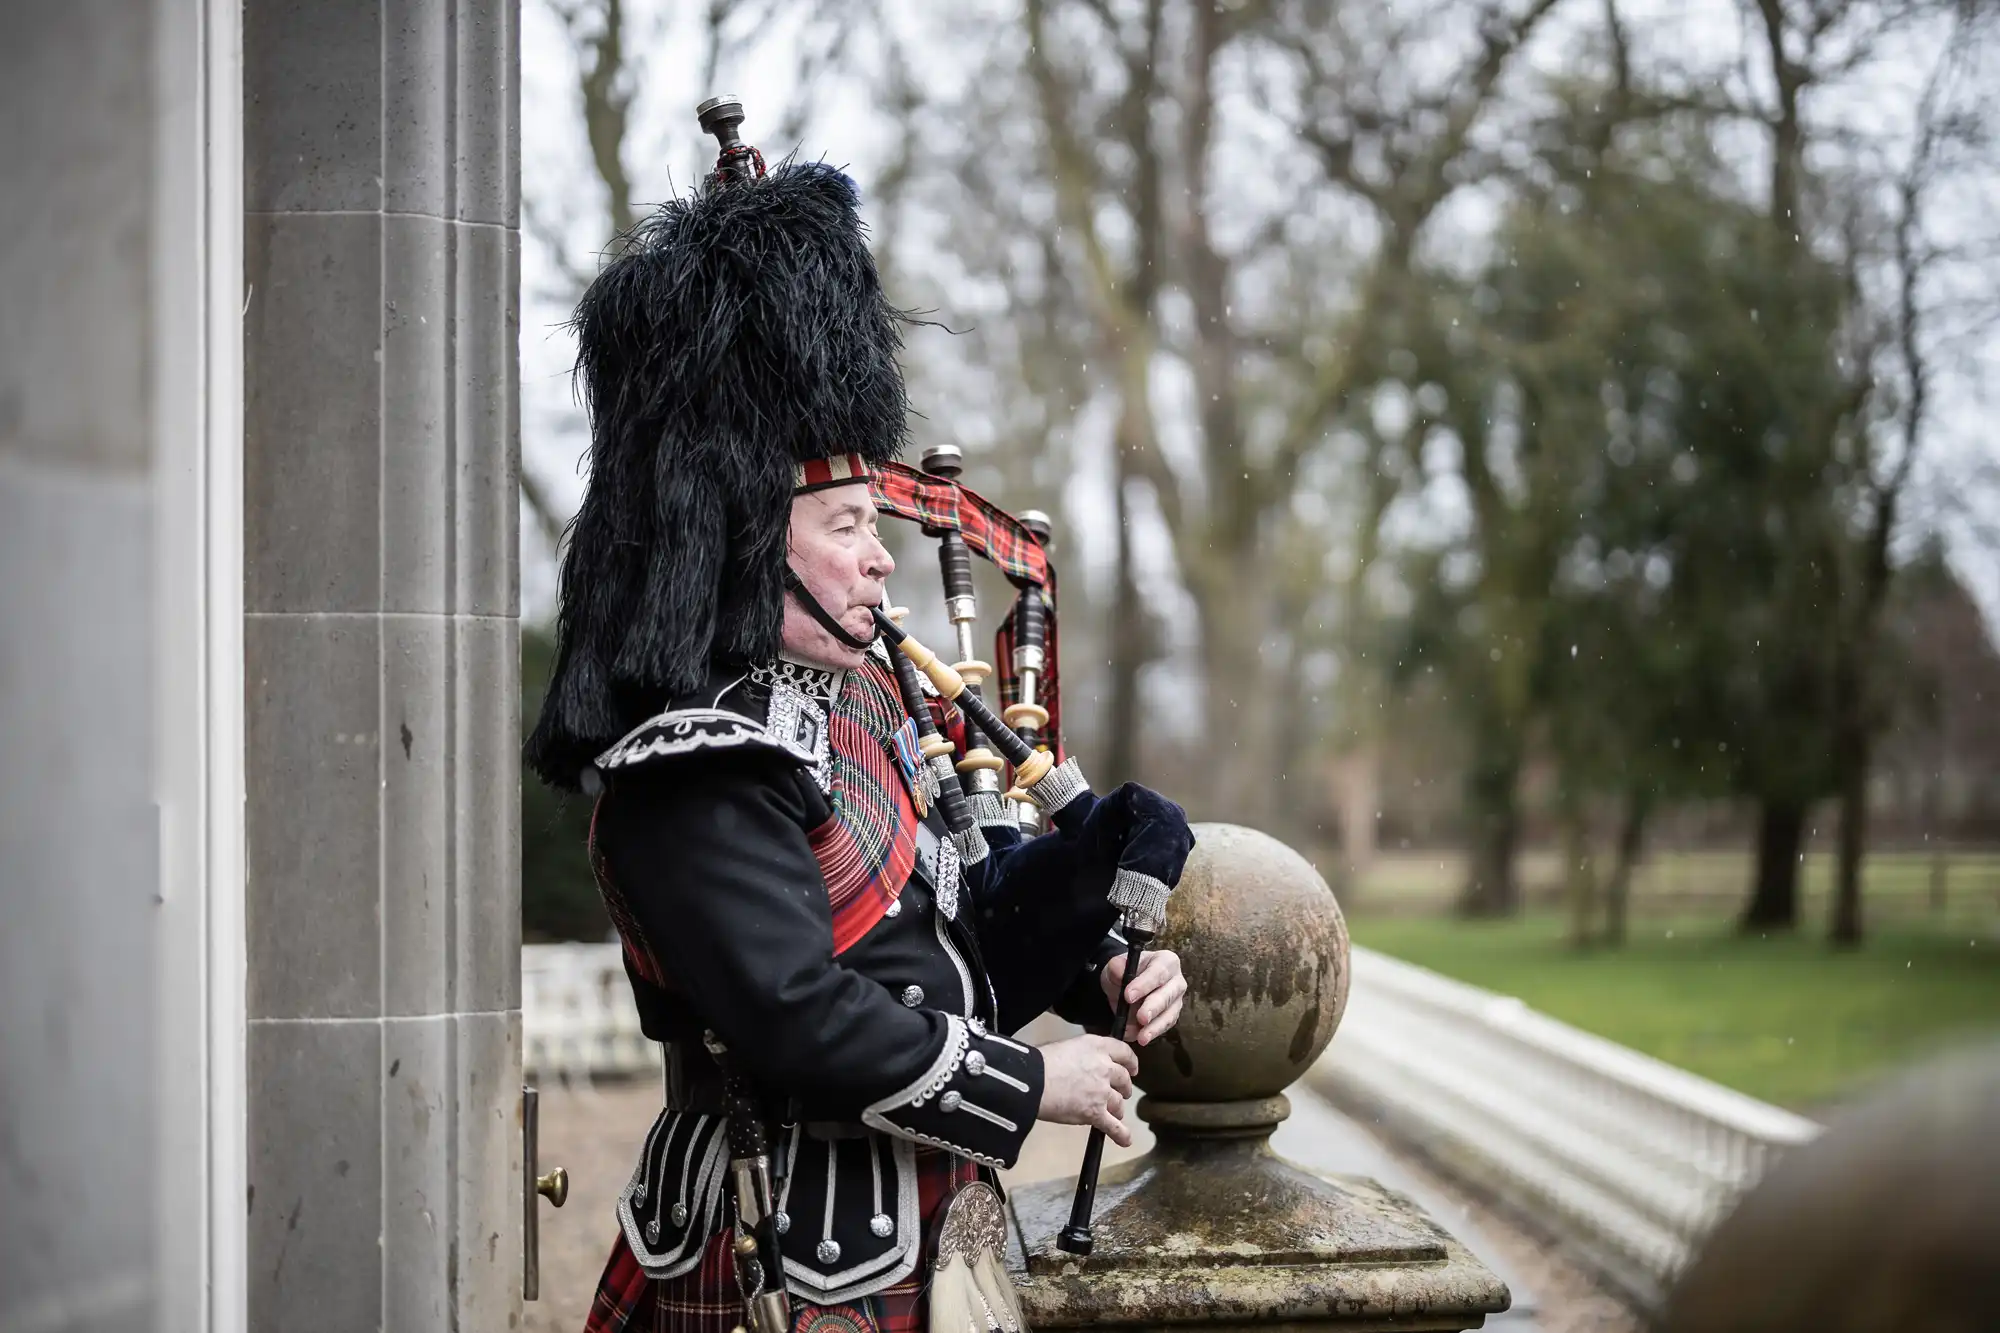 A man wearing traditional Scottish attire plays the bagpipes outdoors, standing near a stone pillar. Trees and grass are visible in the background.